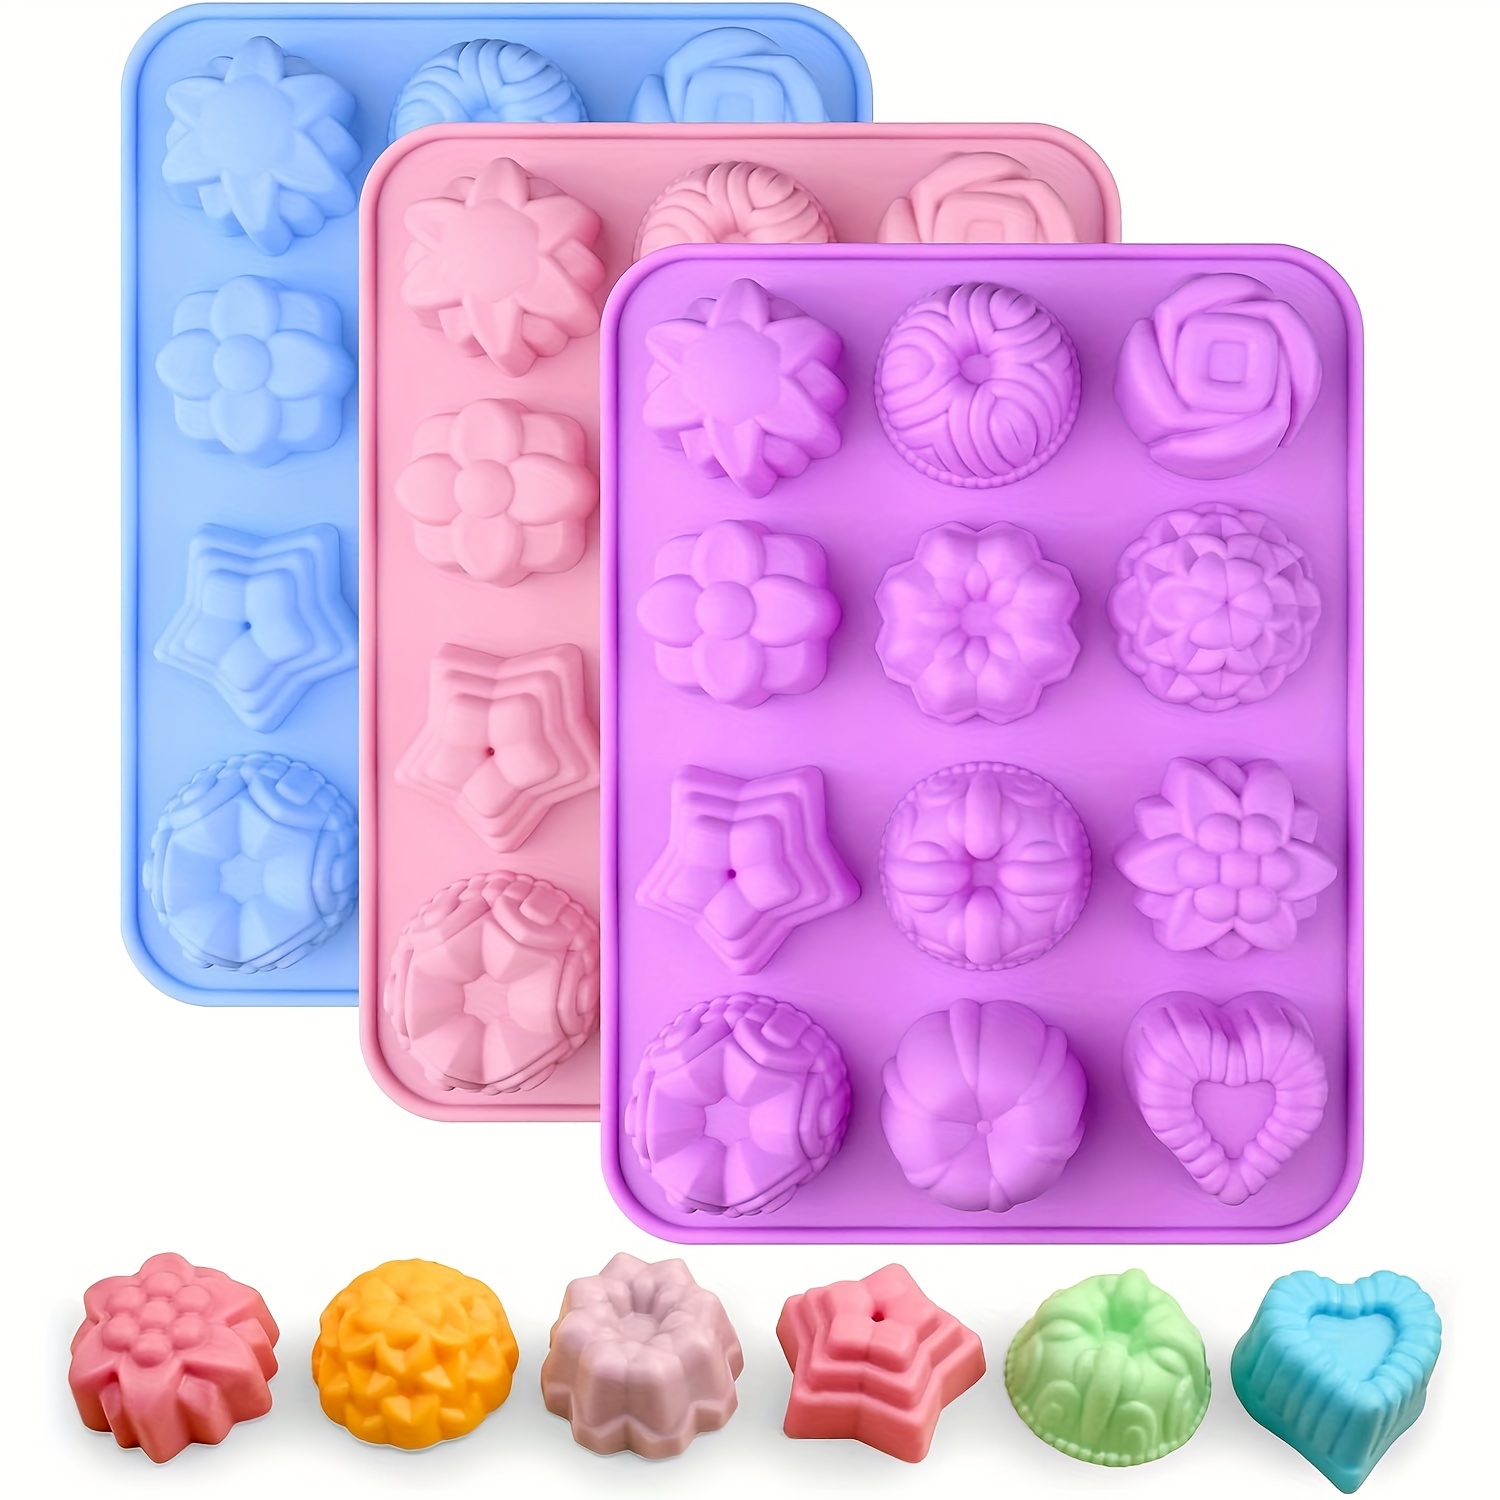 

Silicone Flower Soap Molds - 12 Cavities With Unique Shapes For Soap Making, Lotion Bars, , Chocolate And Candy - Durable, Easy Release And Flexible Mold Tray